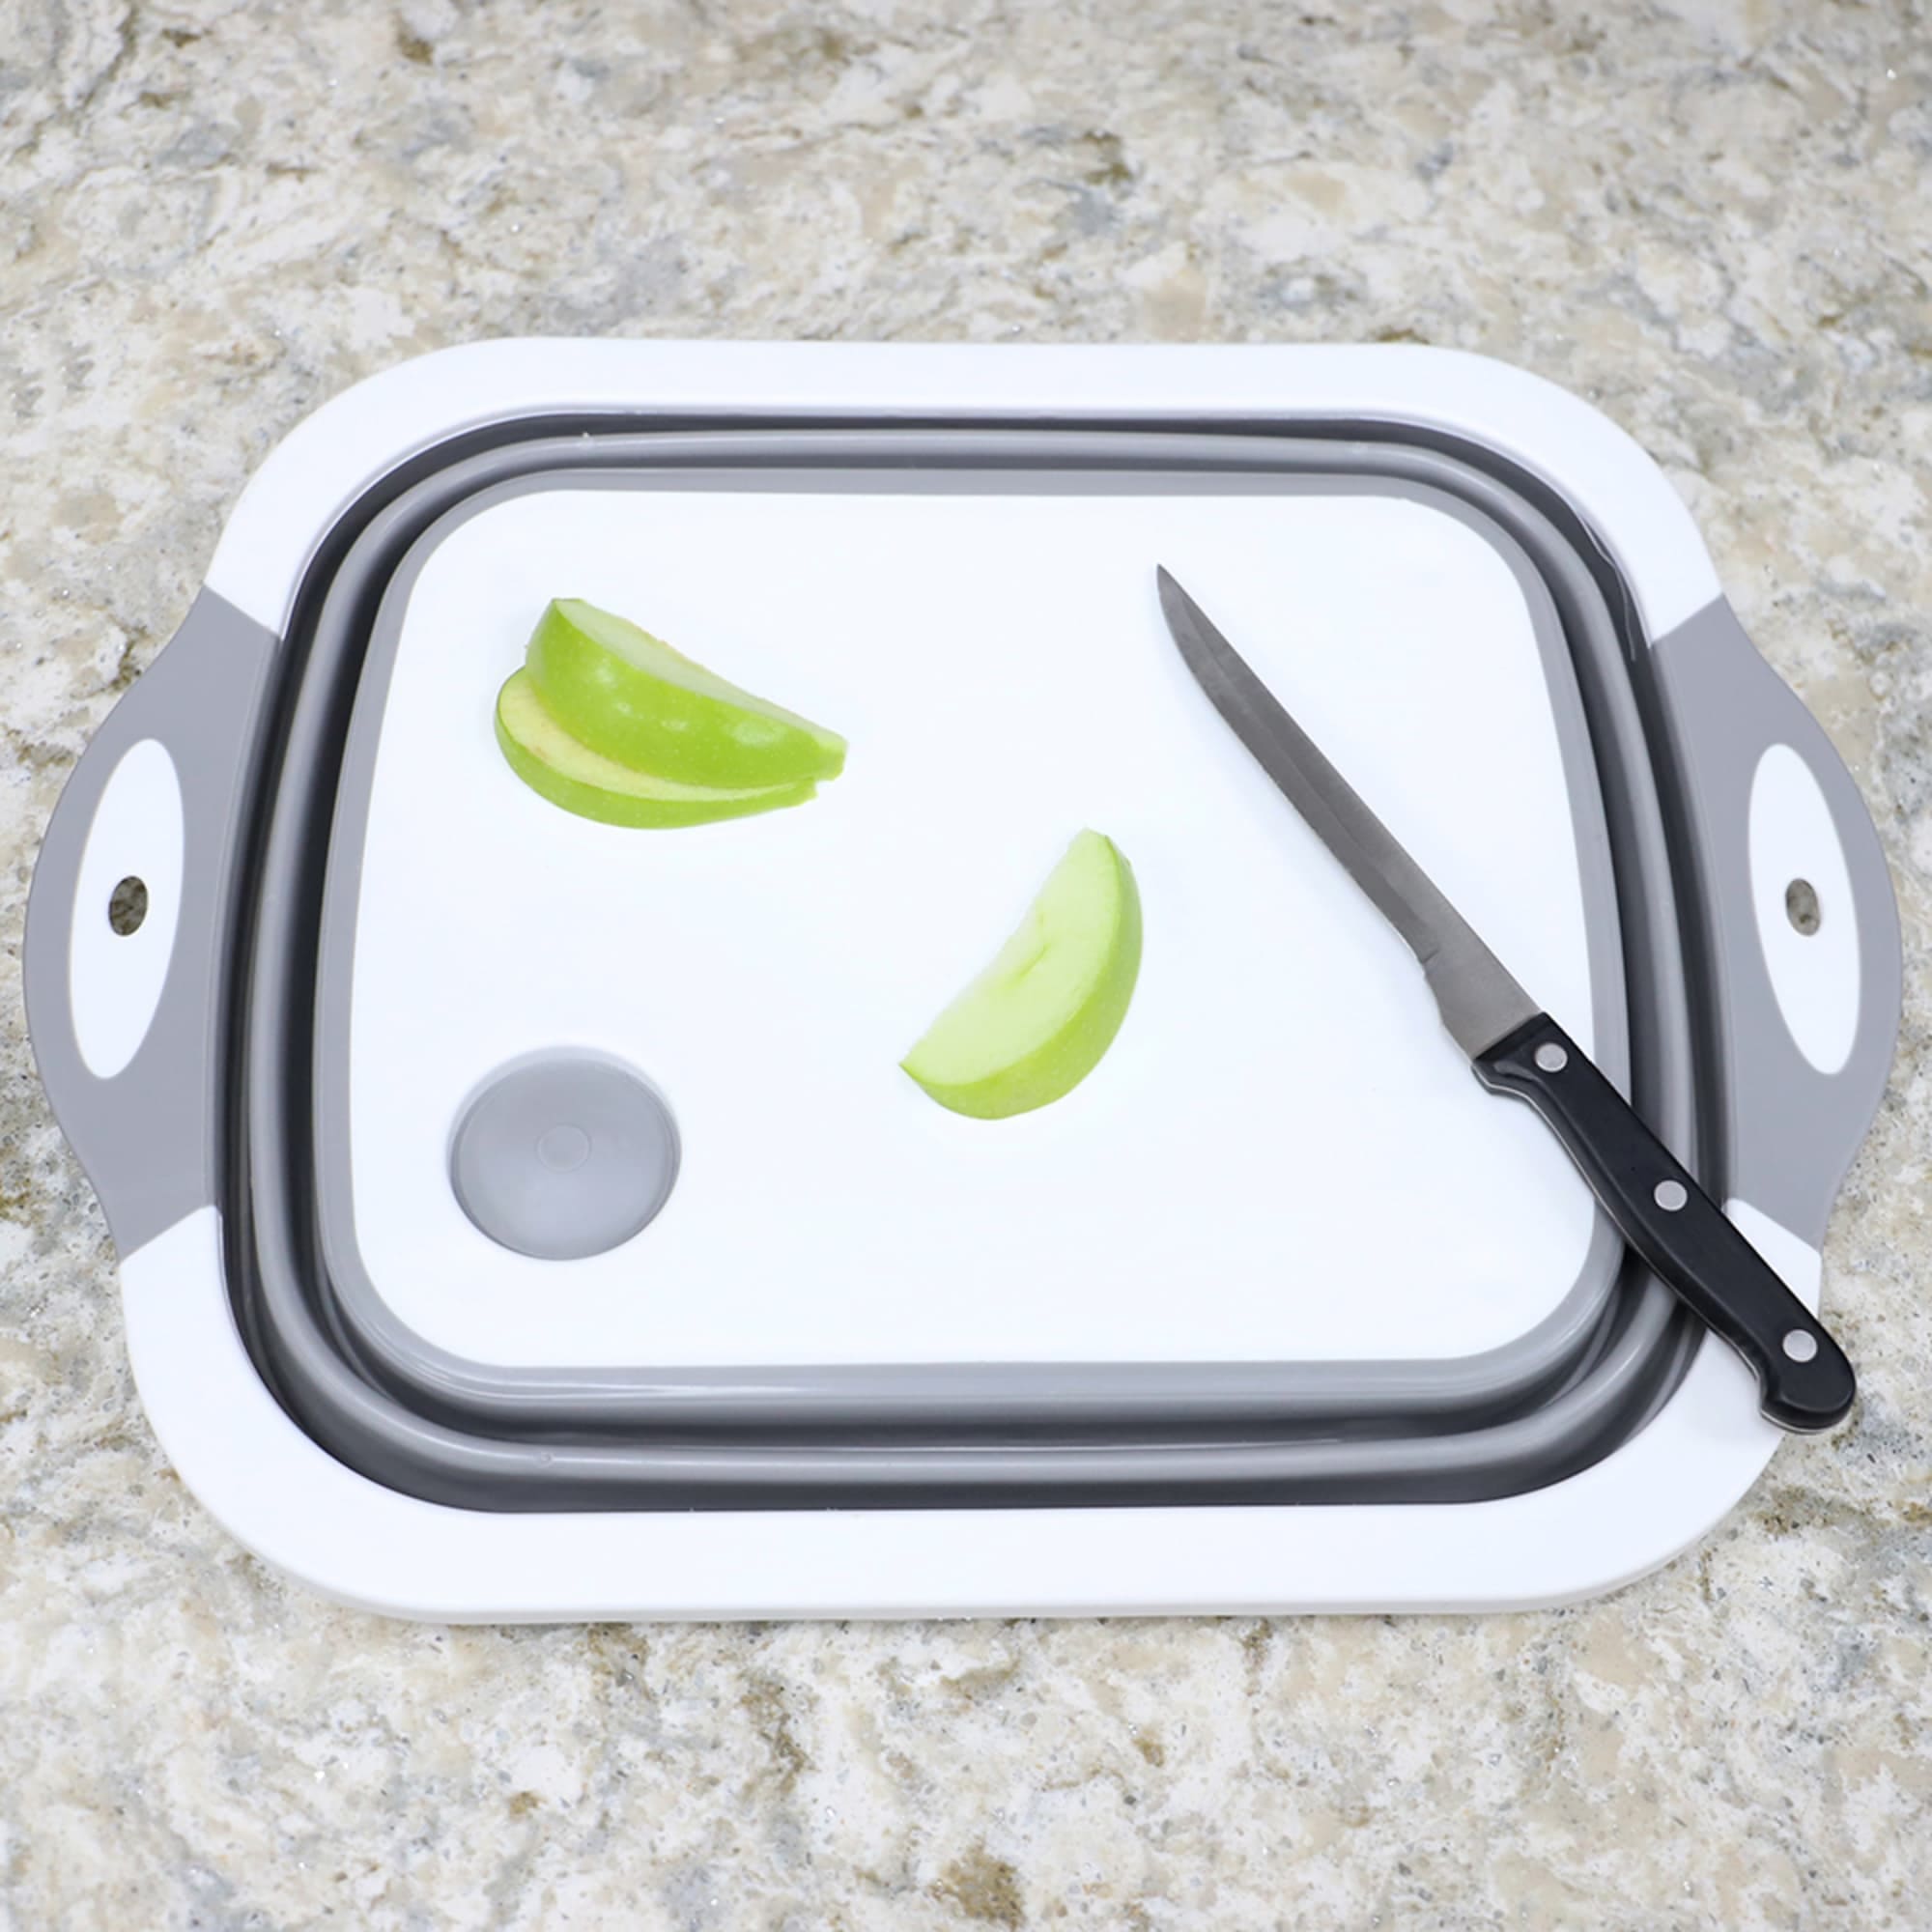 Home Basics 3-in-1 Collapsible Basket Cutting Board Strainer $6.00 EACH, CASE PACK OF 12